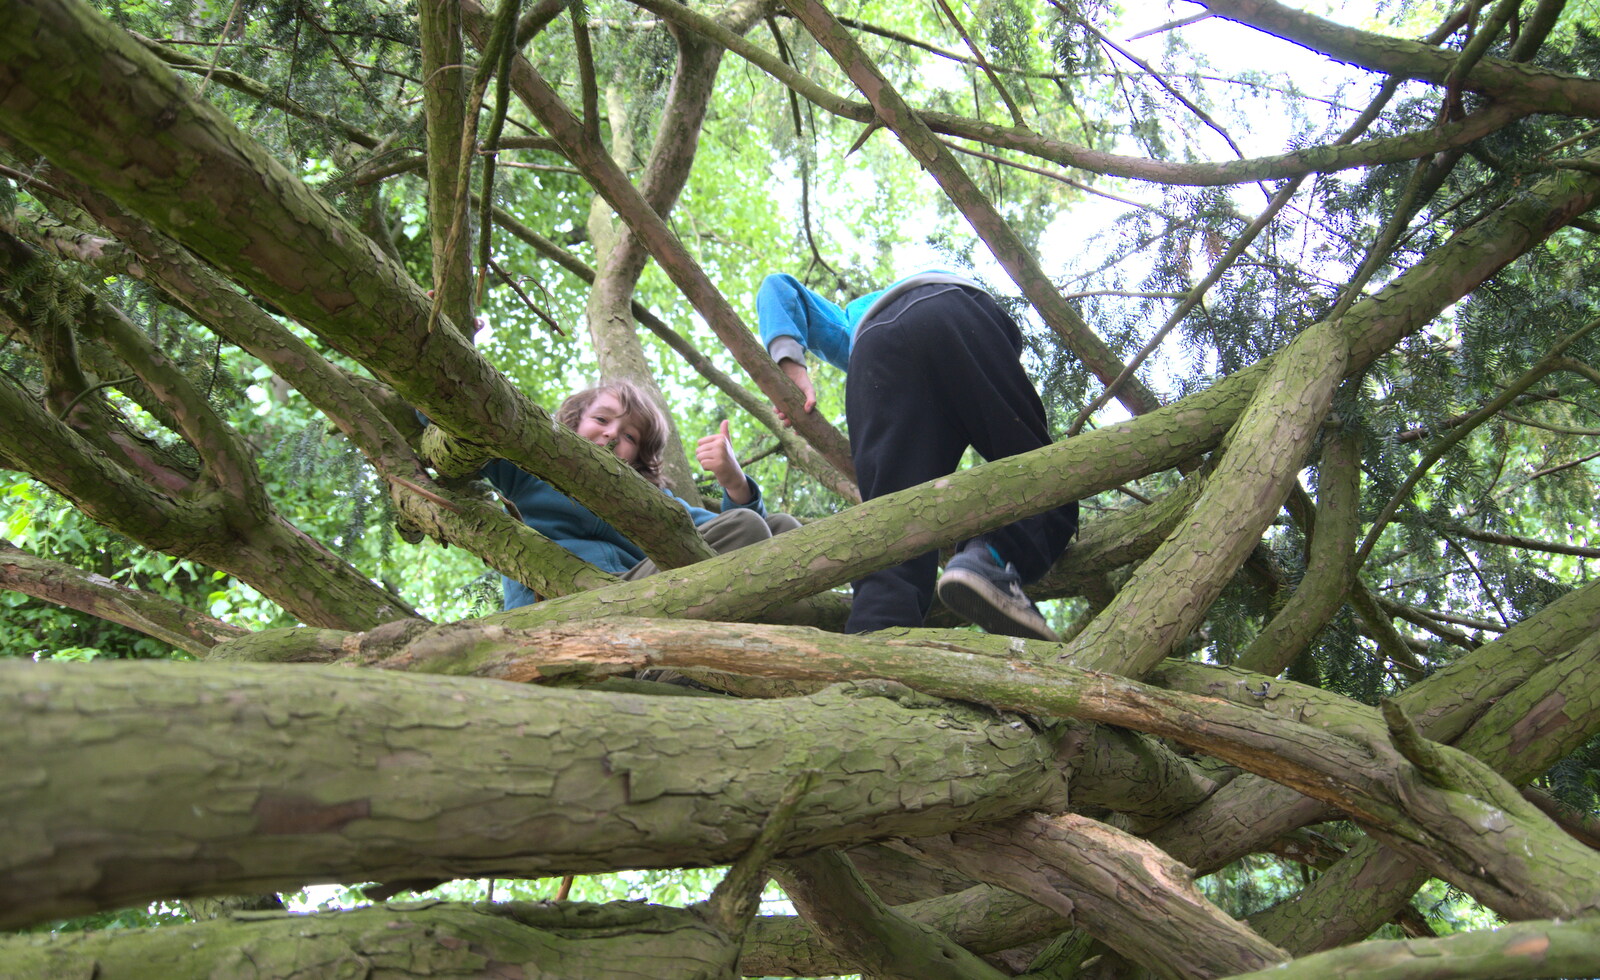 The boys are up a tree again from More Lockdown Fun, Diss and Eye, Norfolk and Suffolk - 30th May 2020